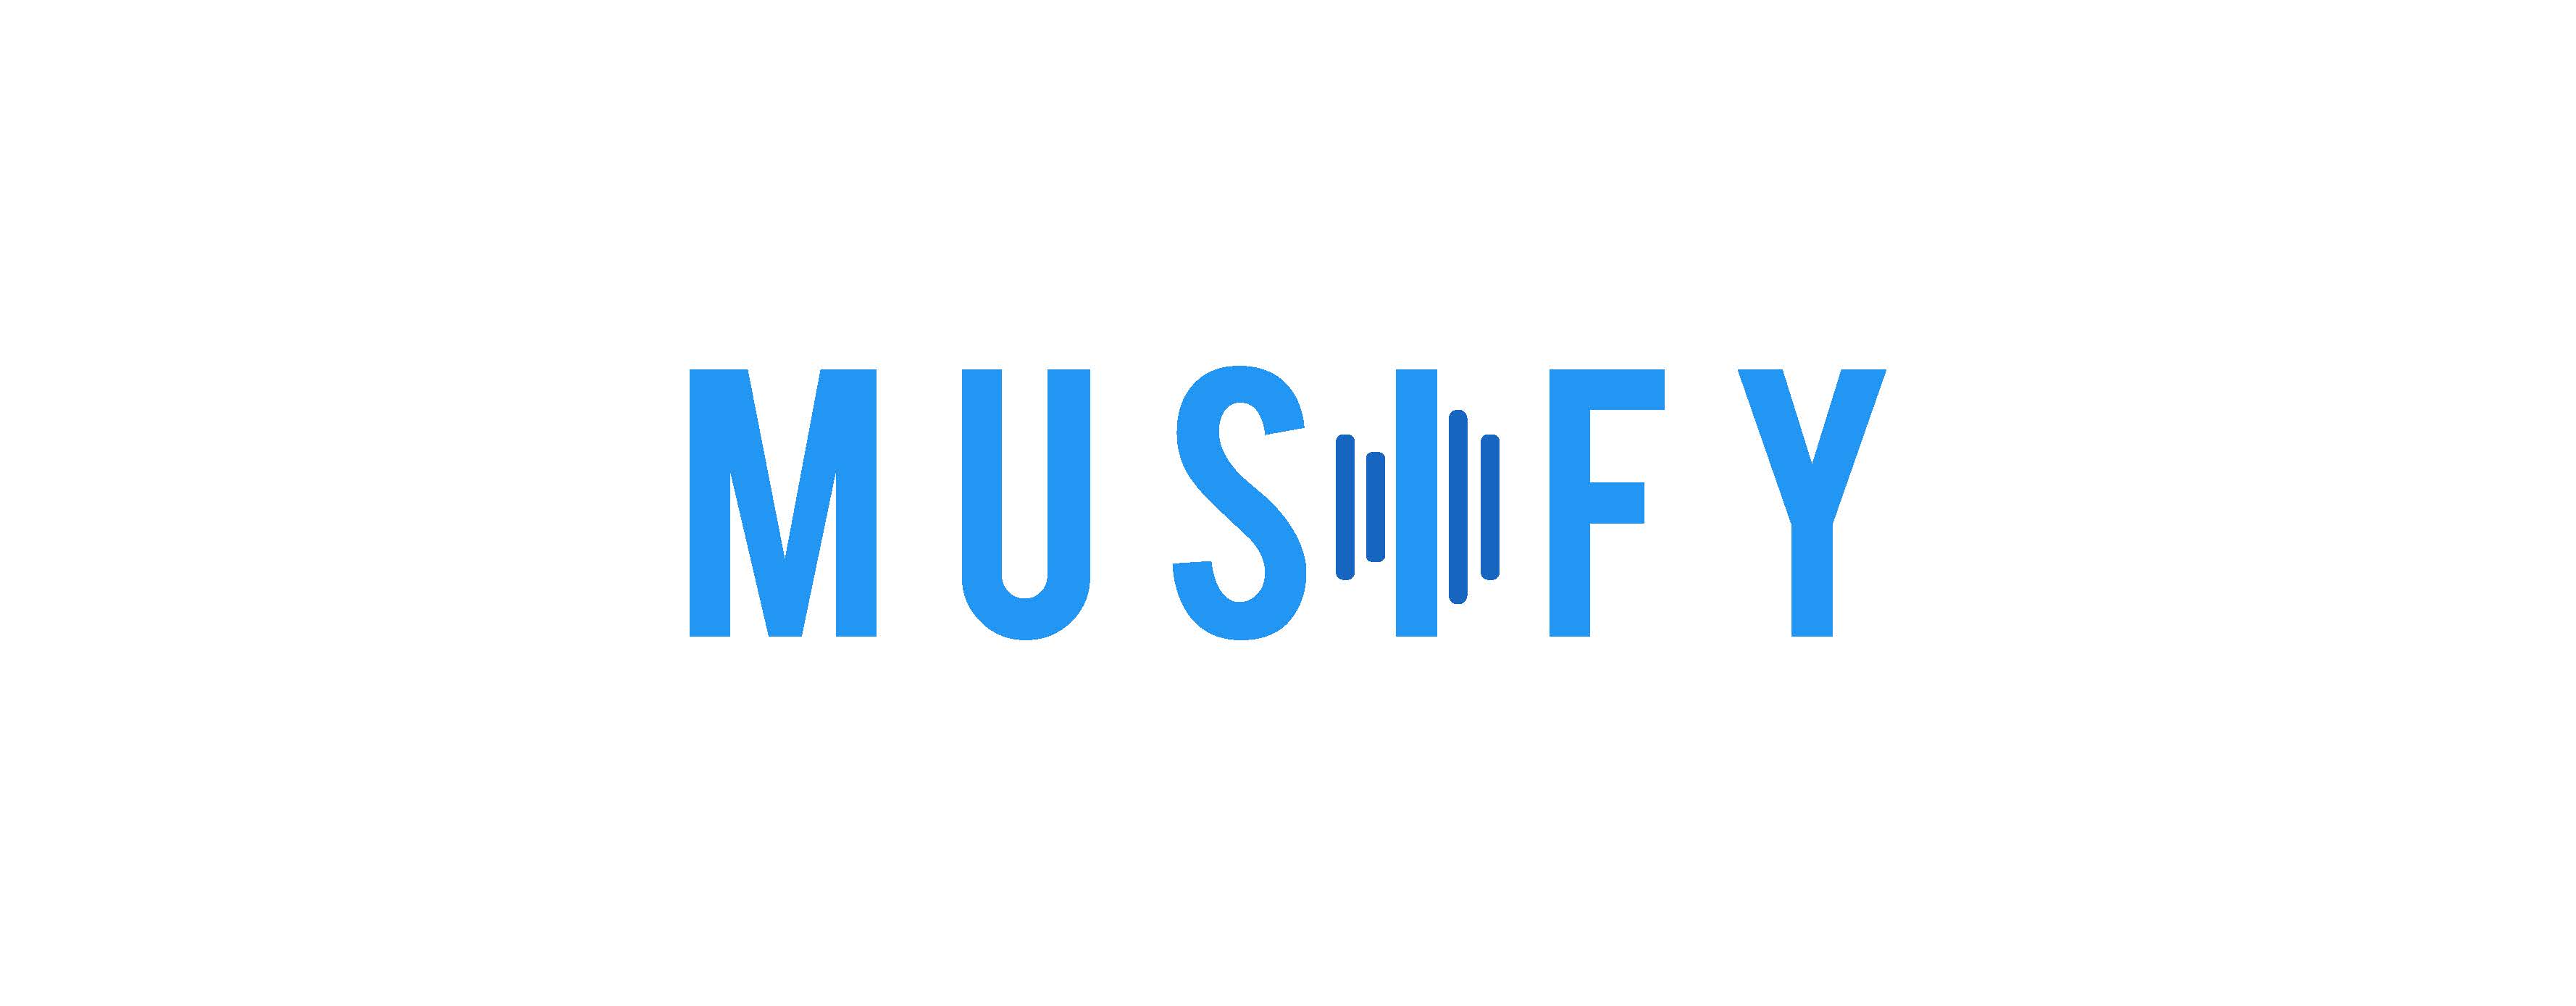 Musify 3.5.1 download the new for windows